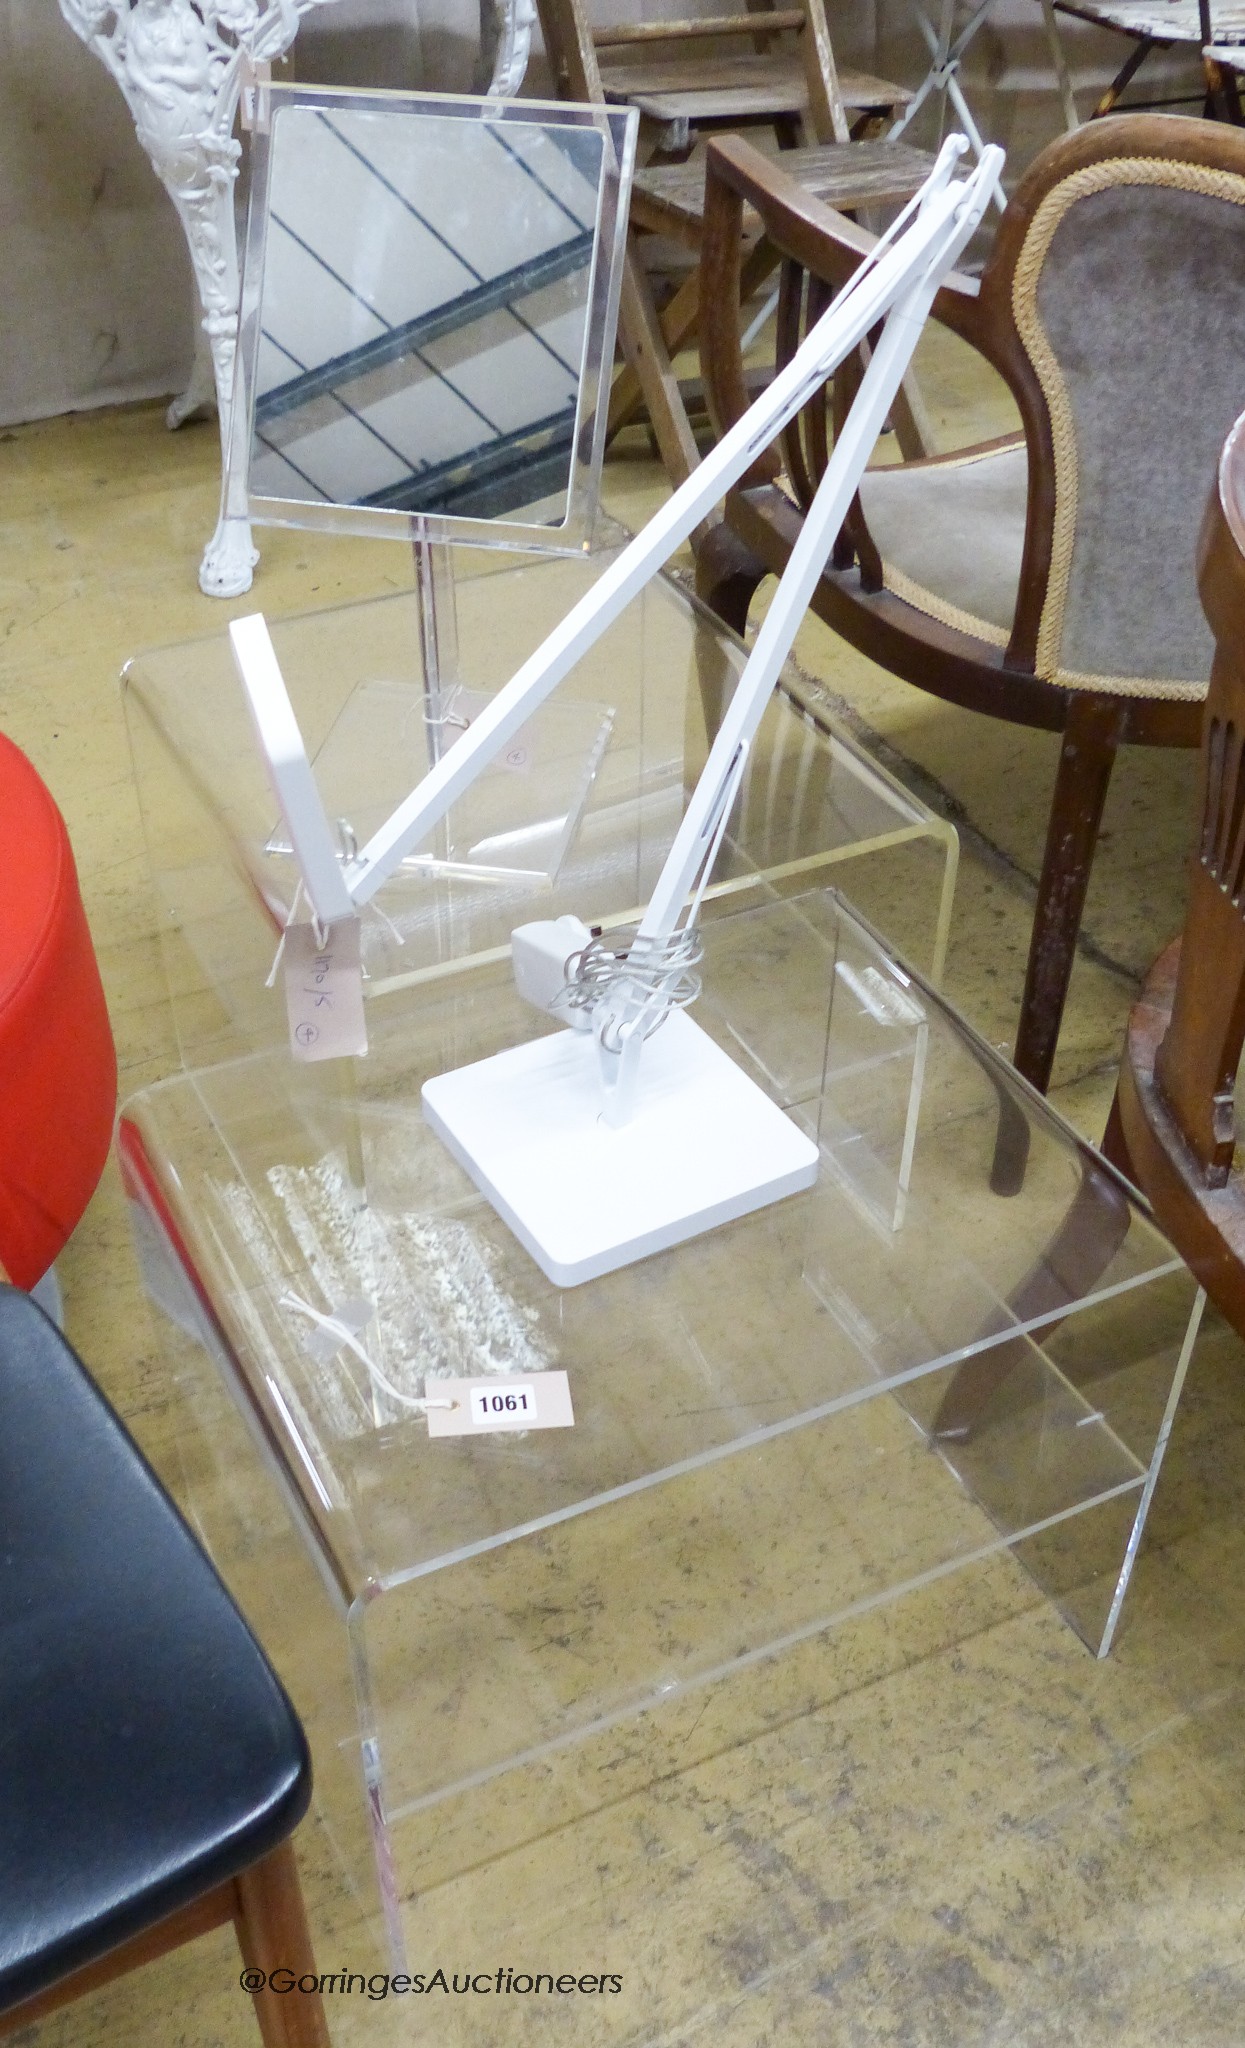 A pair of contemporary Perspex side tables, Perspex shaving mirror and an Italian white angle poise lamp.